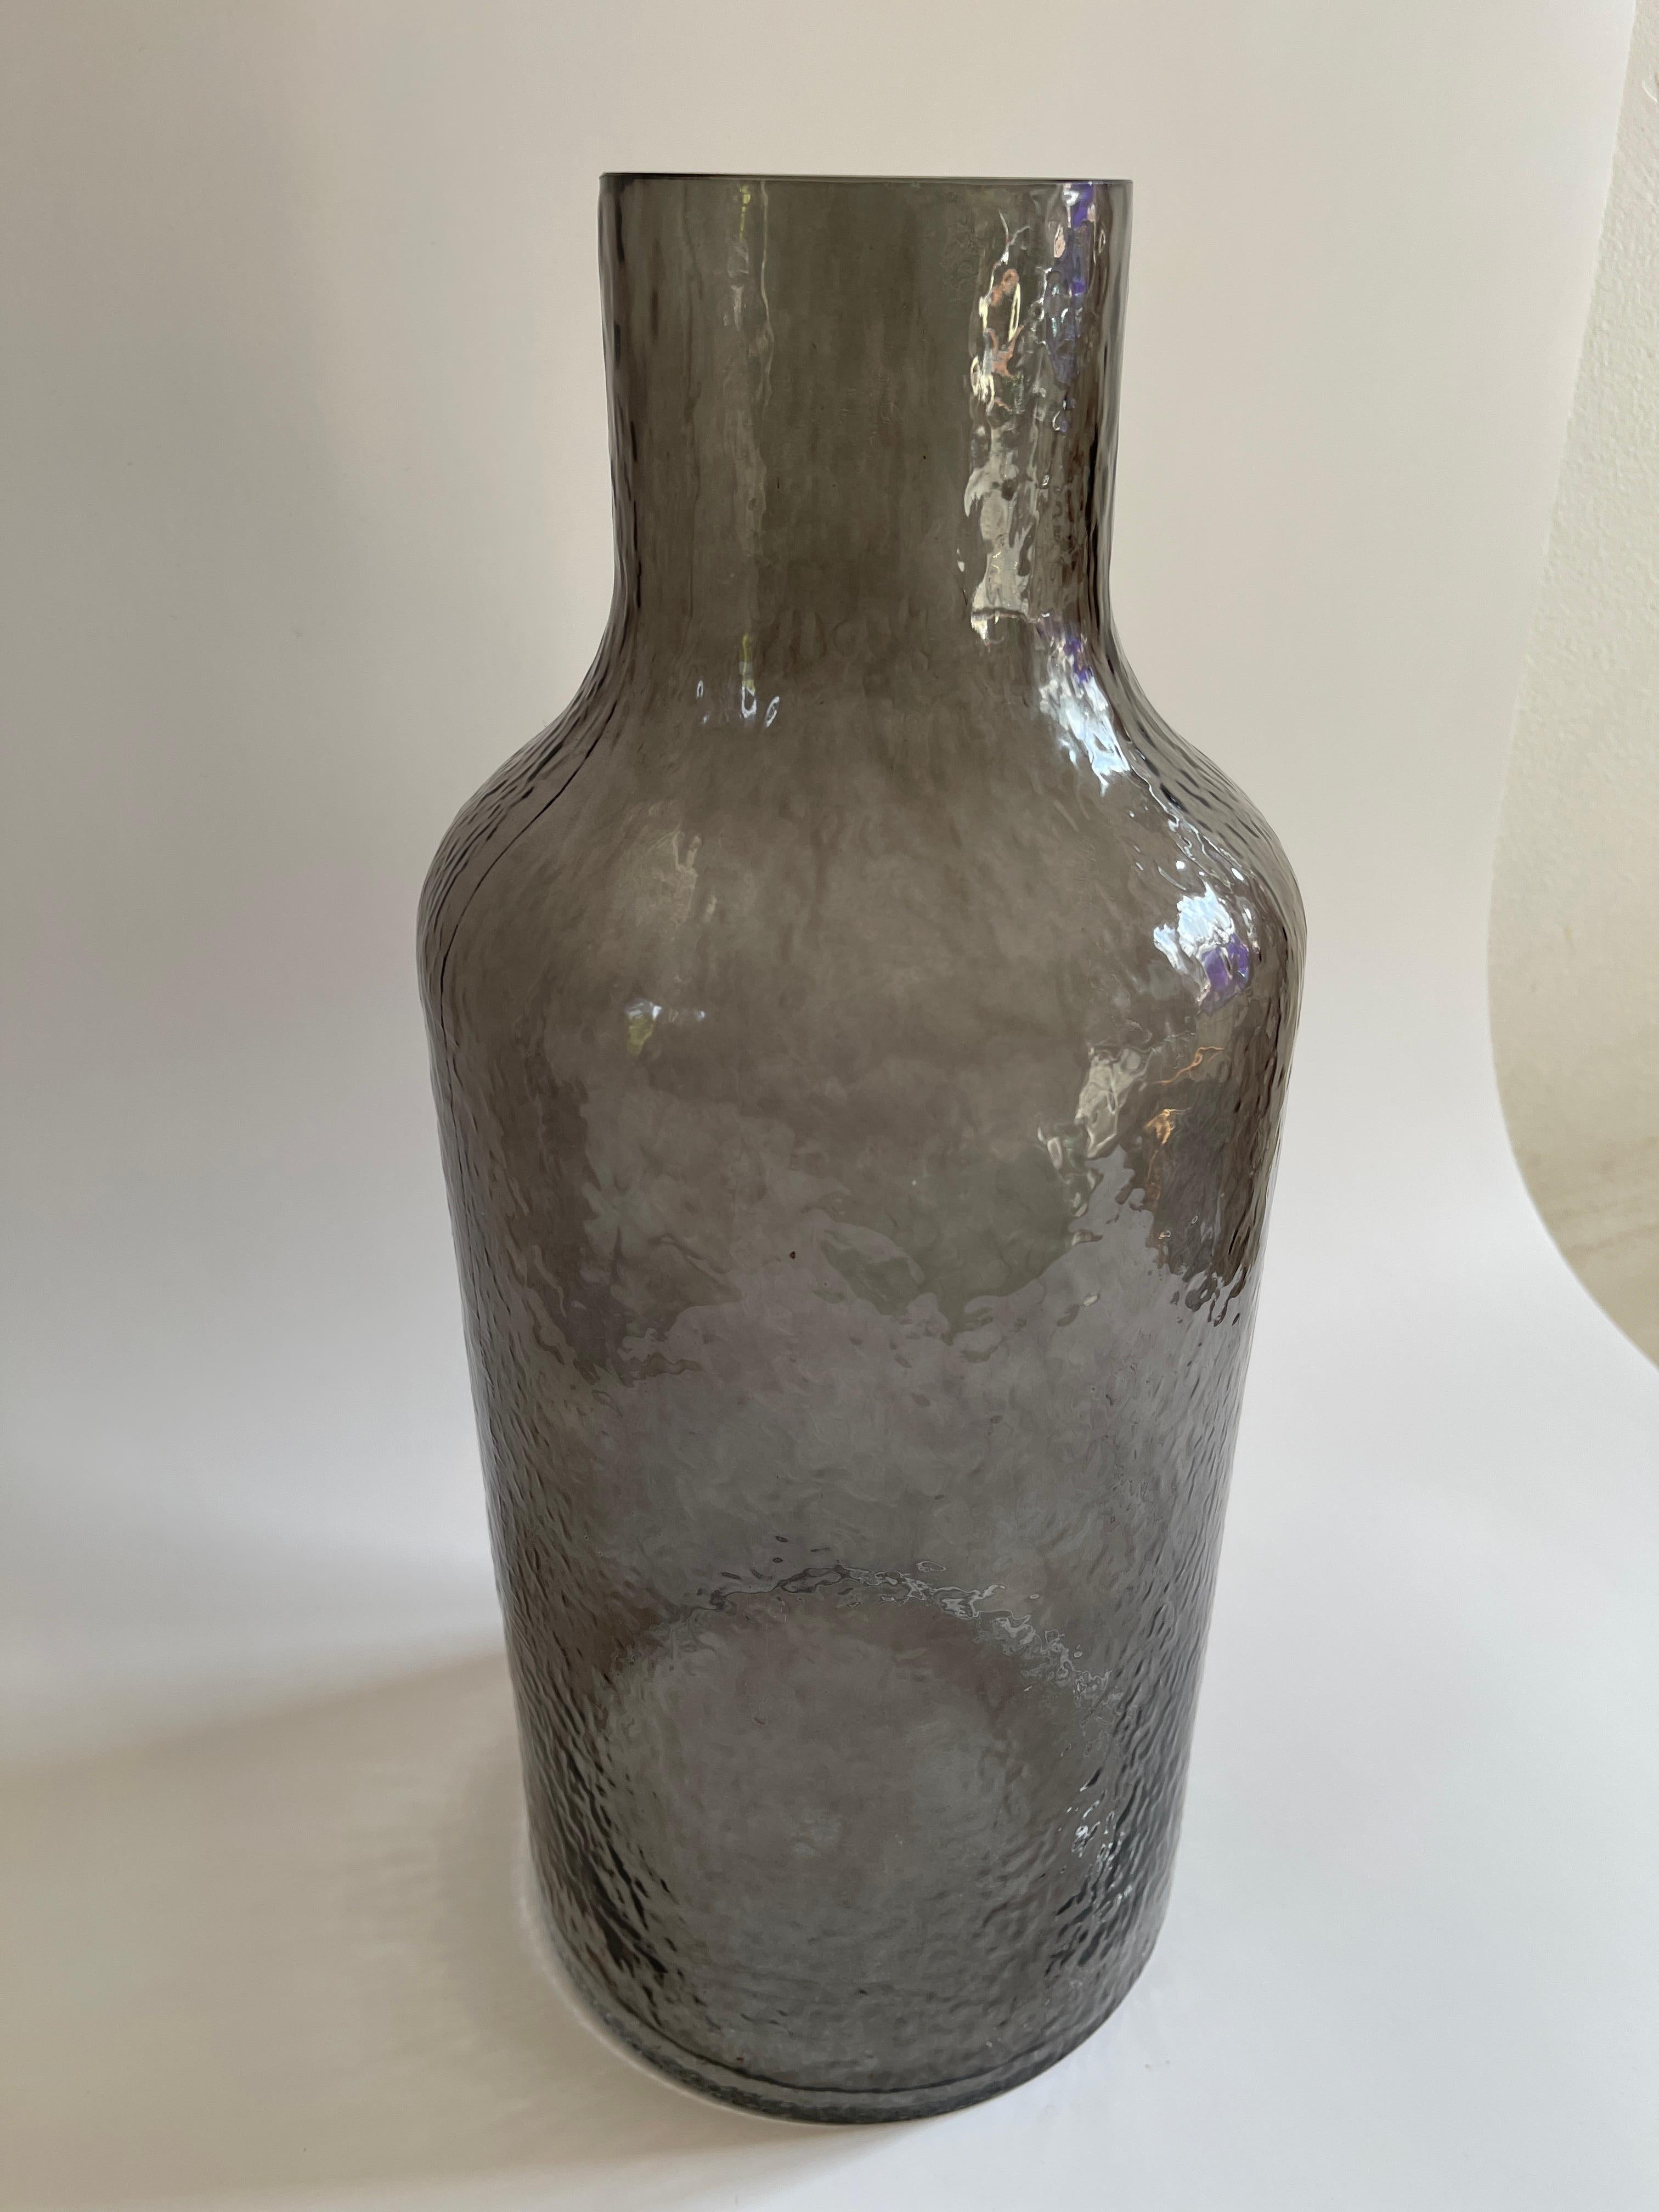 Monumental Danish modern smoke glass bottle form vase with rippled texture,  The textured glass filters the light, crating a wonderful effect.